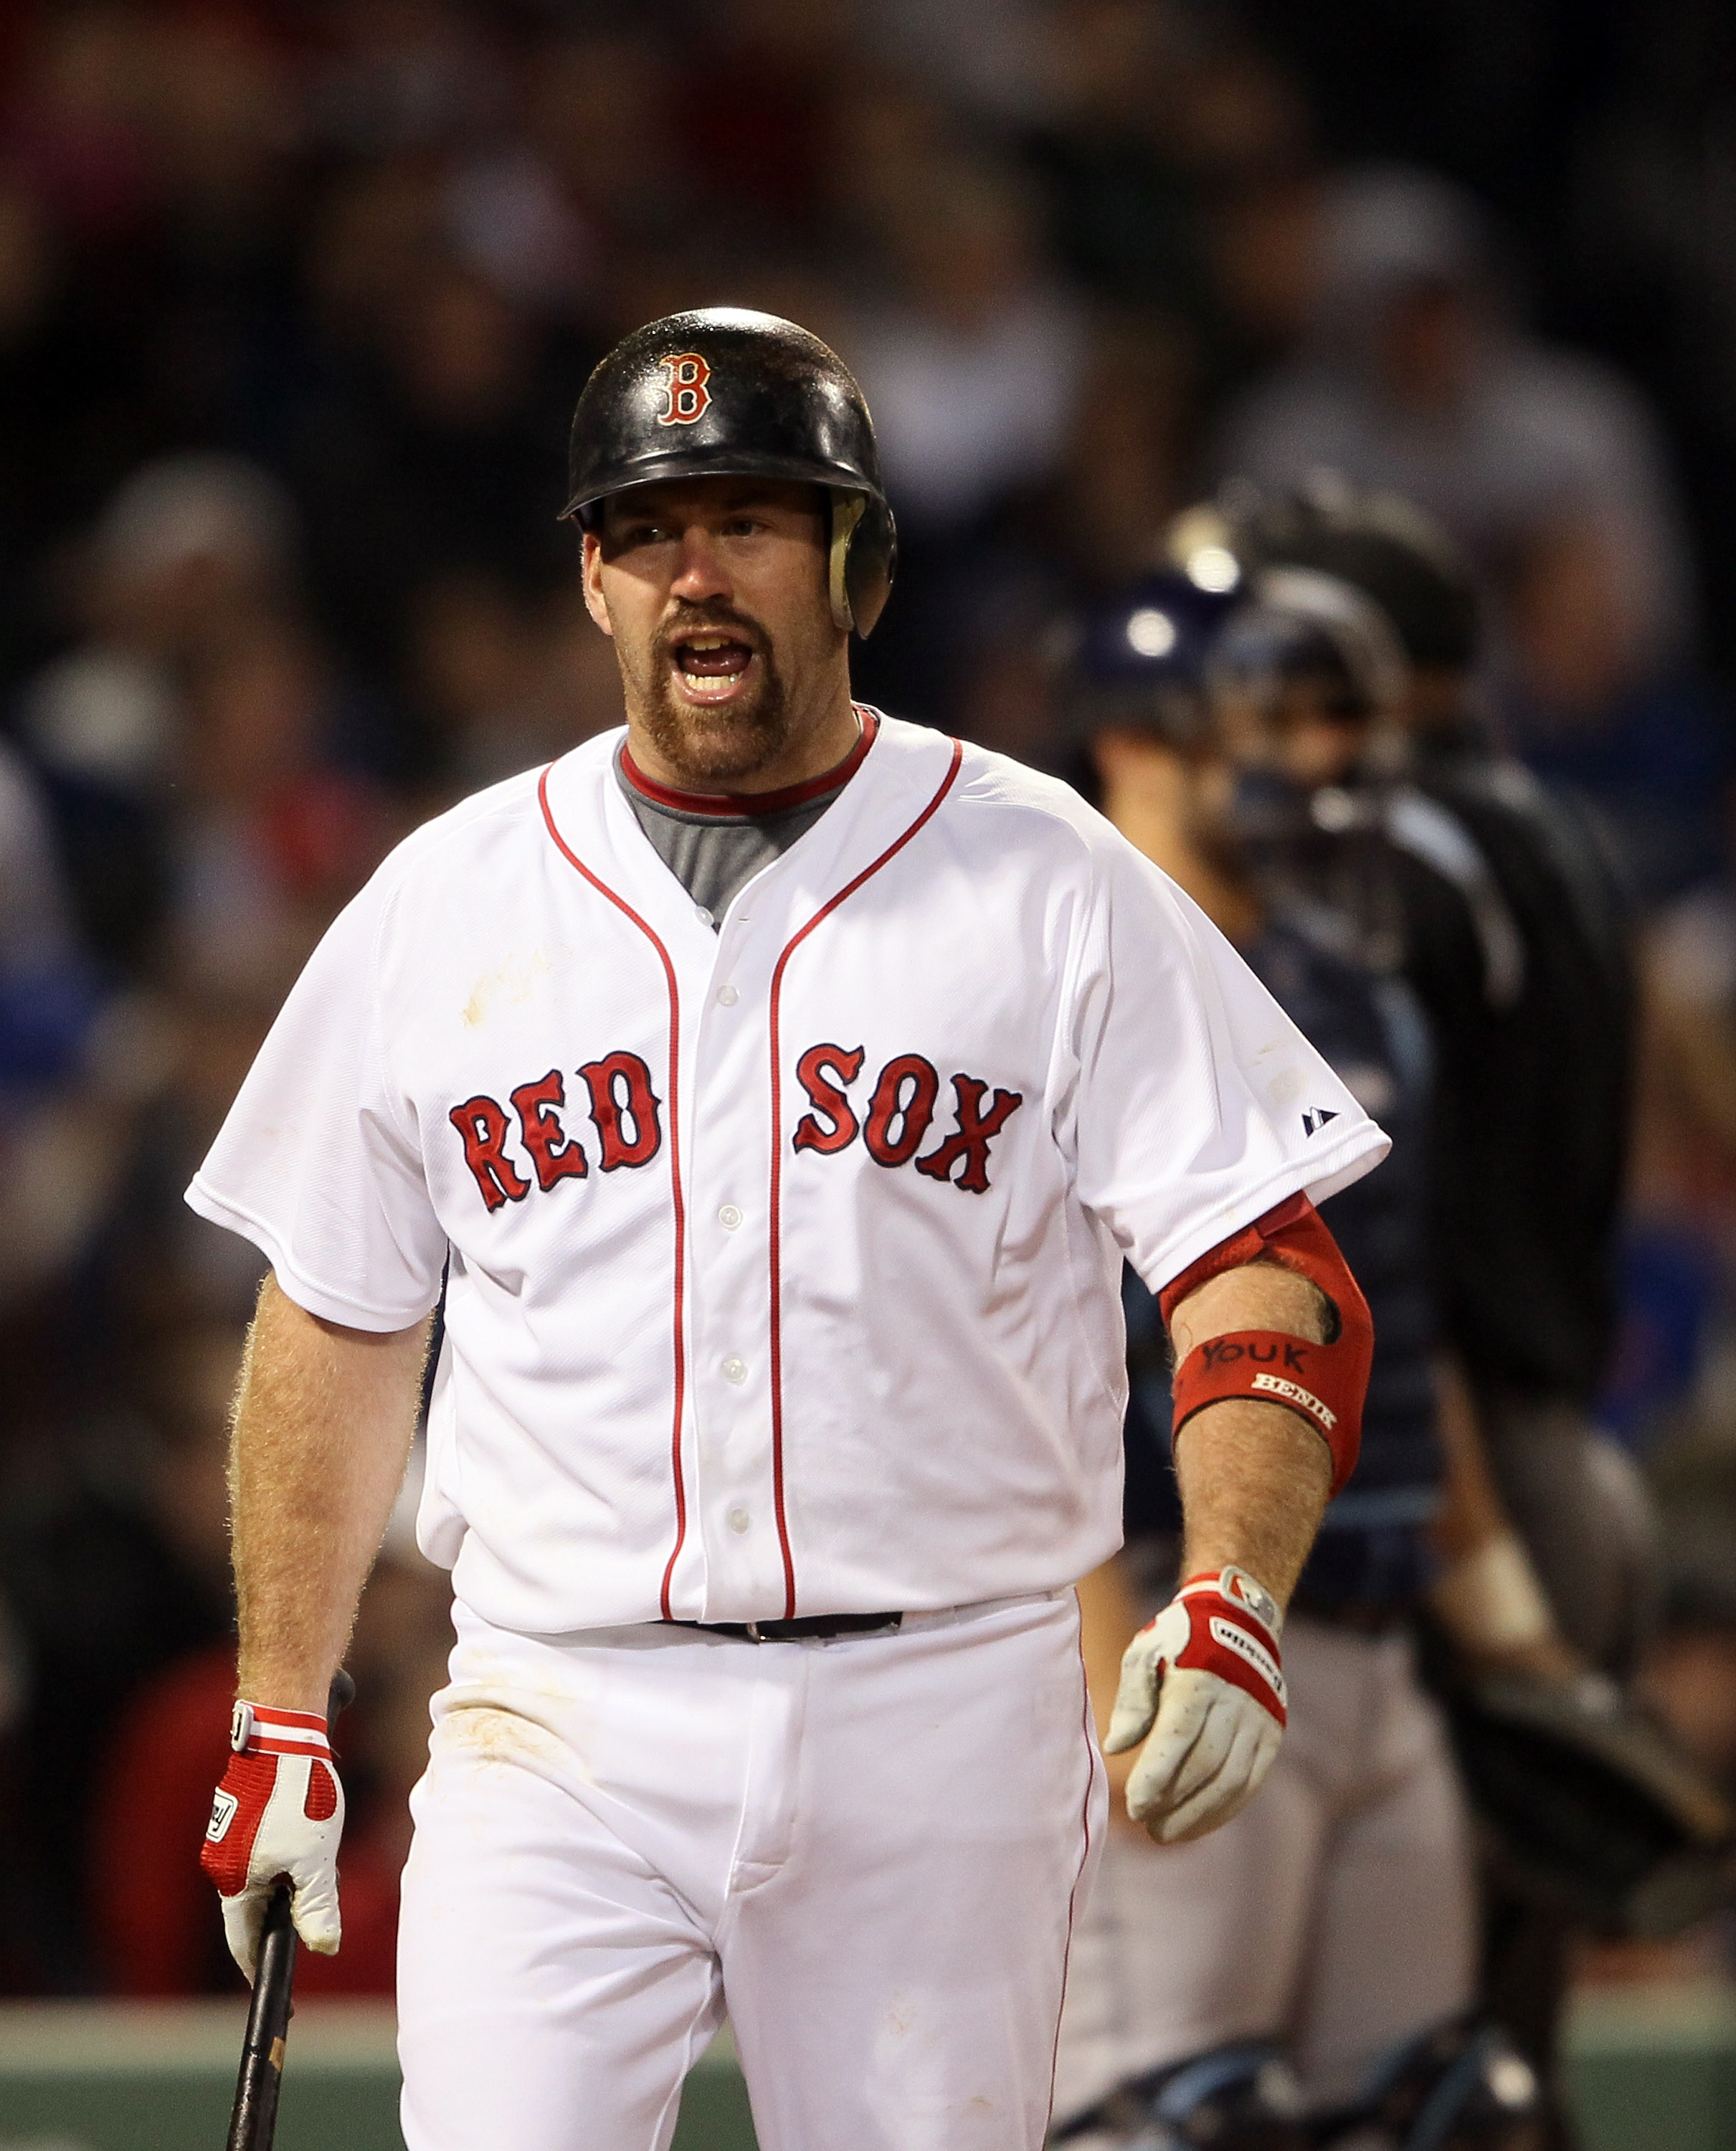 Johnny Damon and the 10 Craziest Players in Boston Red Sox History